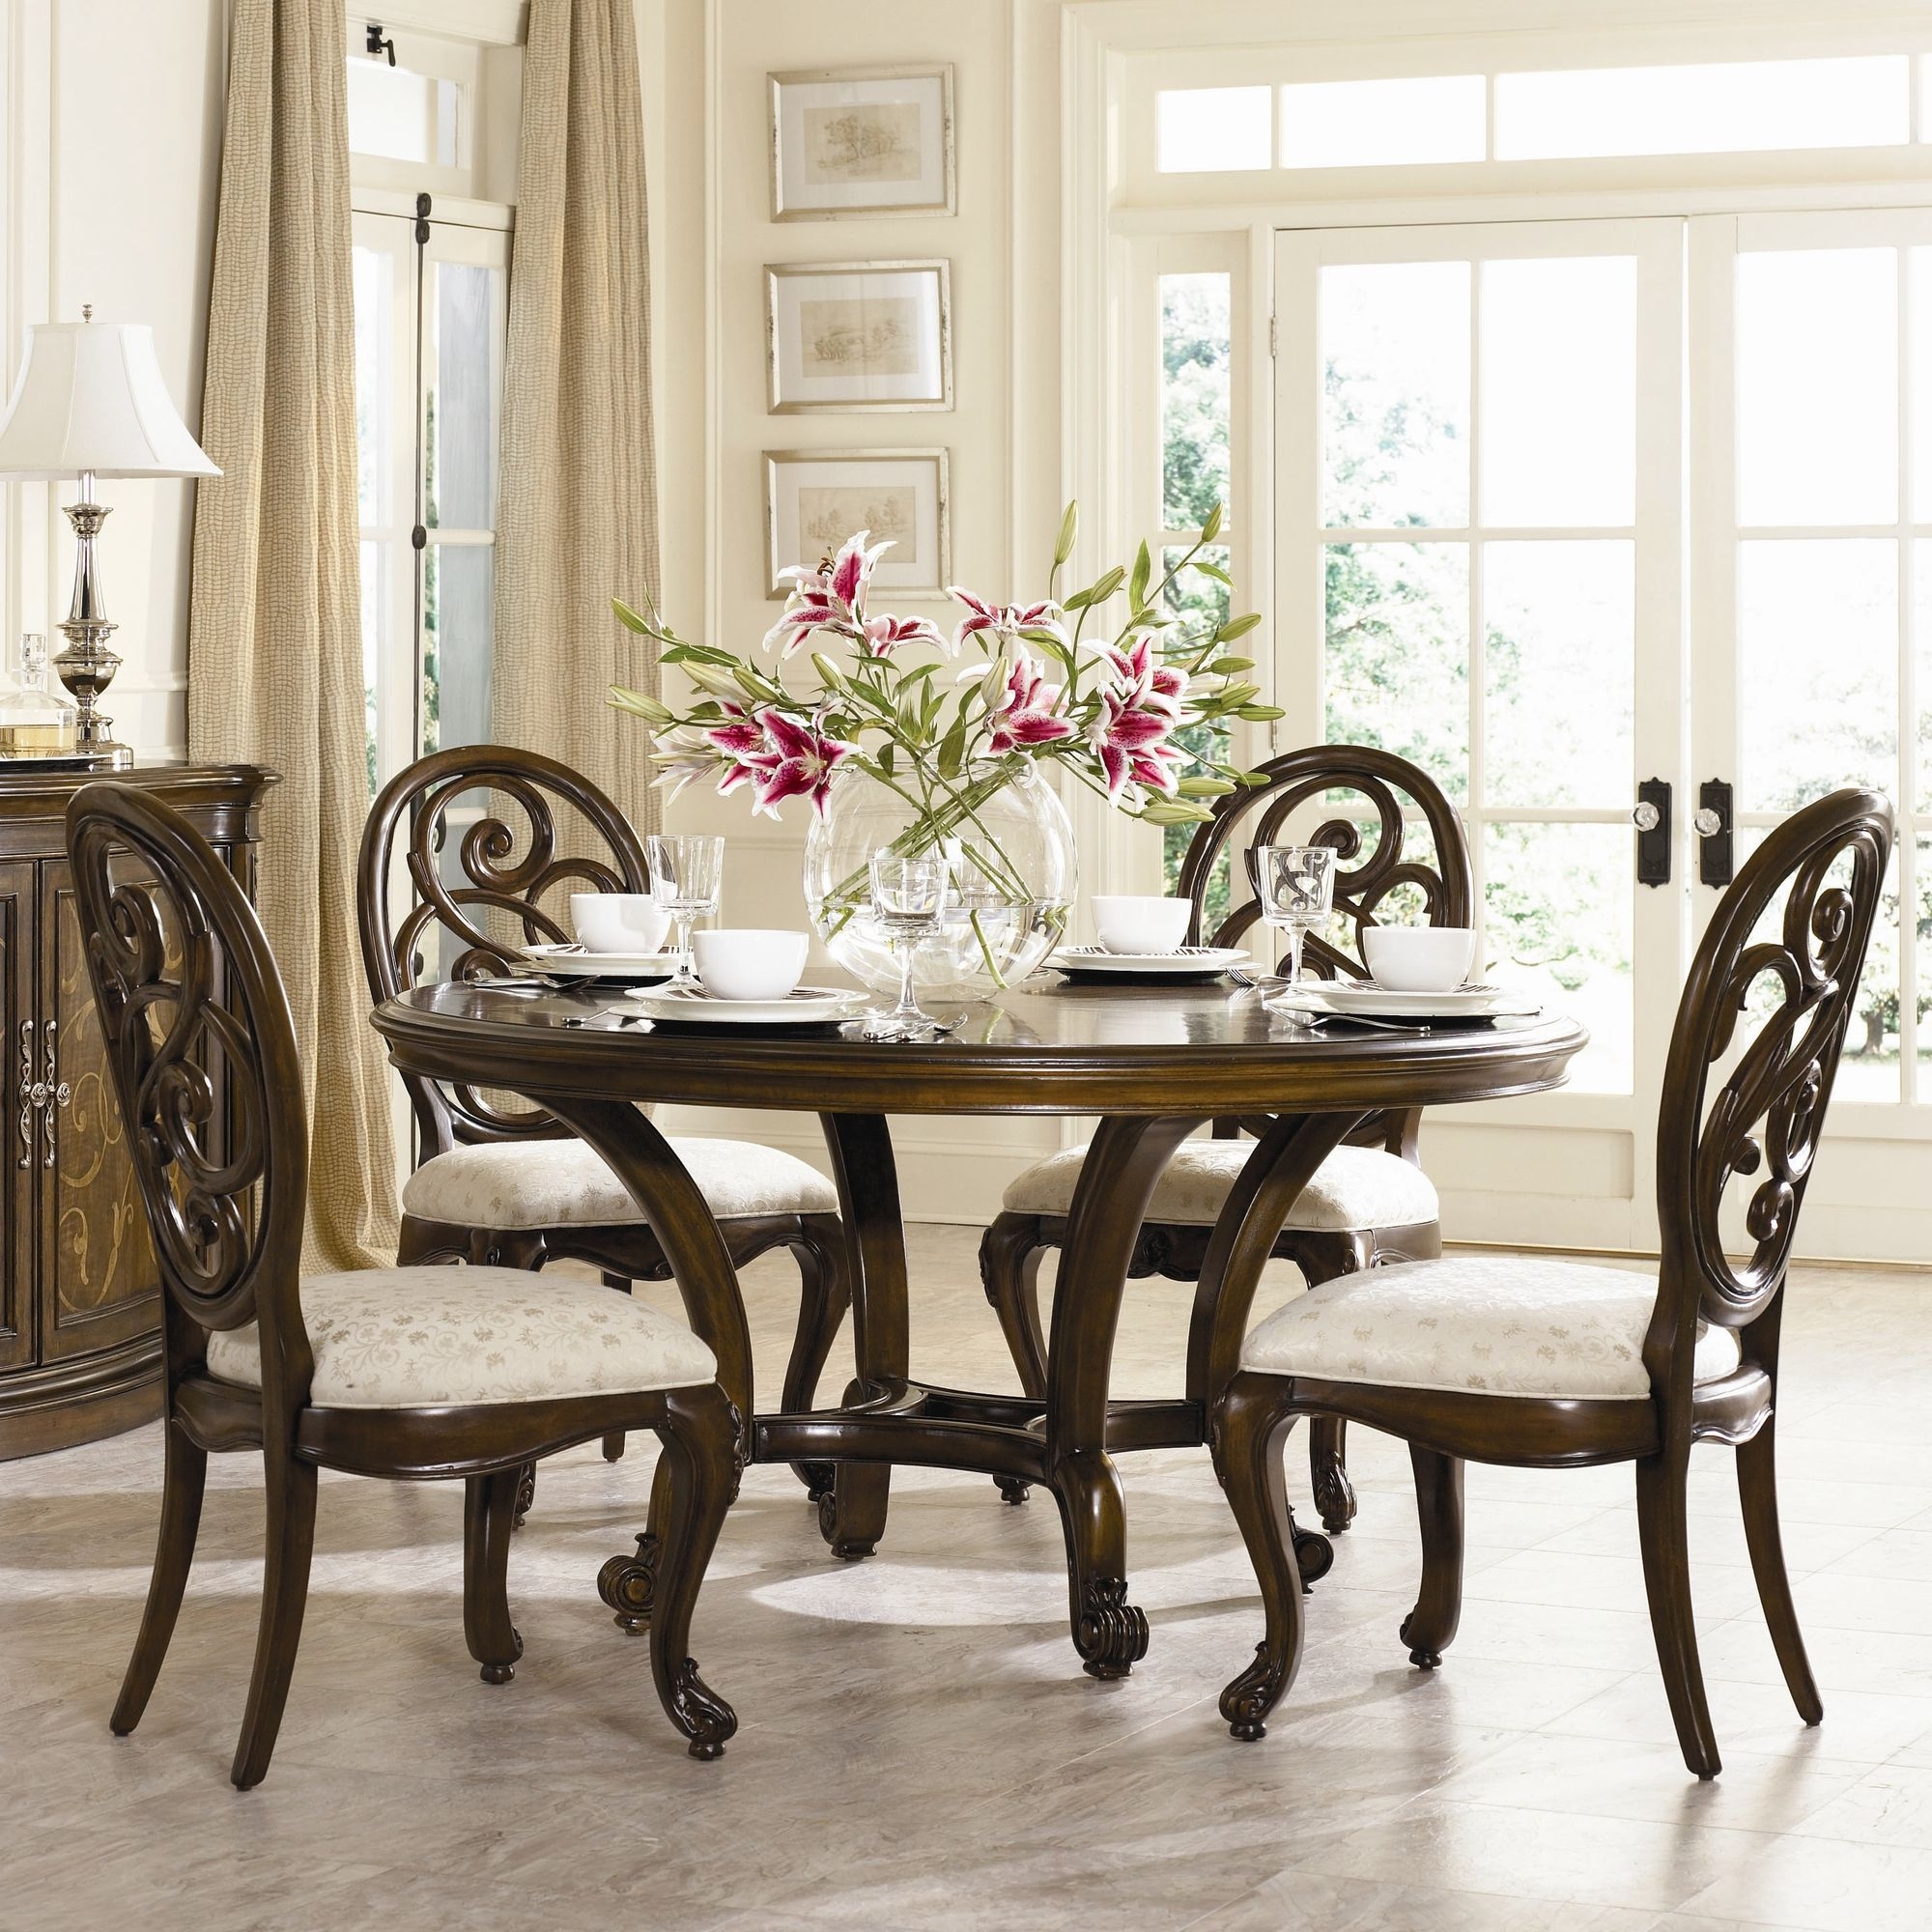 Attractive jcpenney furniture for dining room furniture set with round